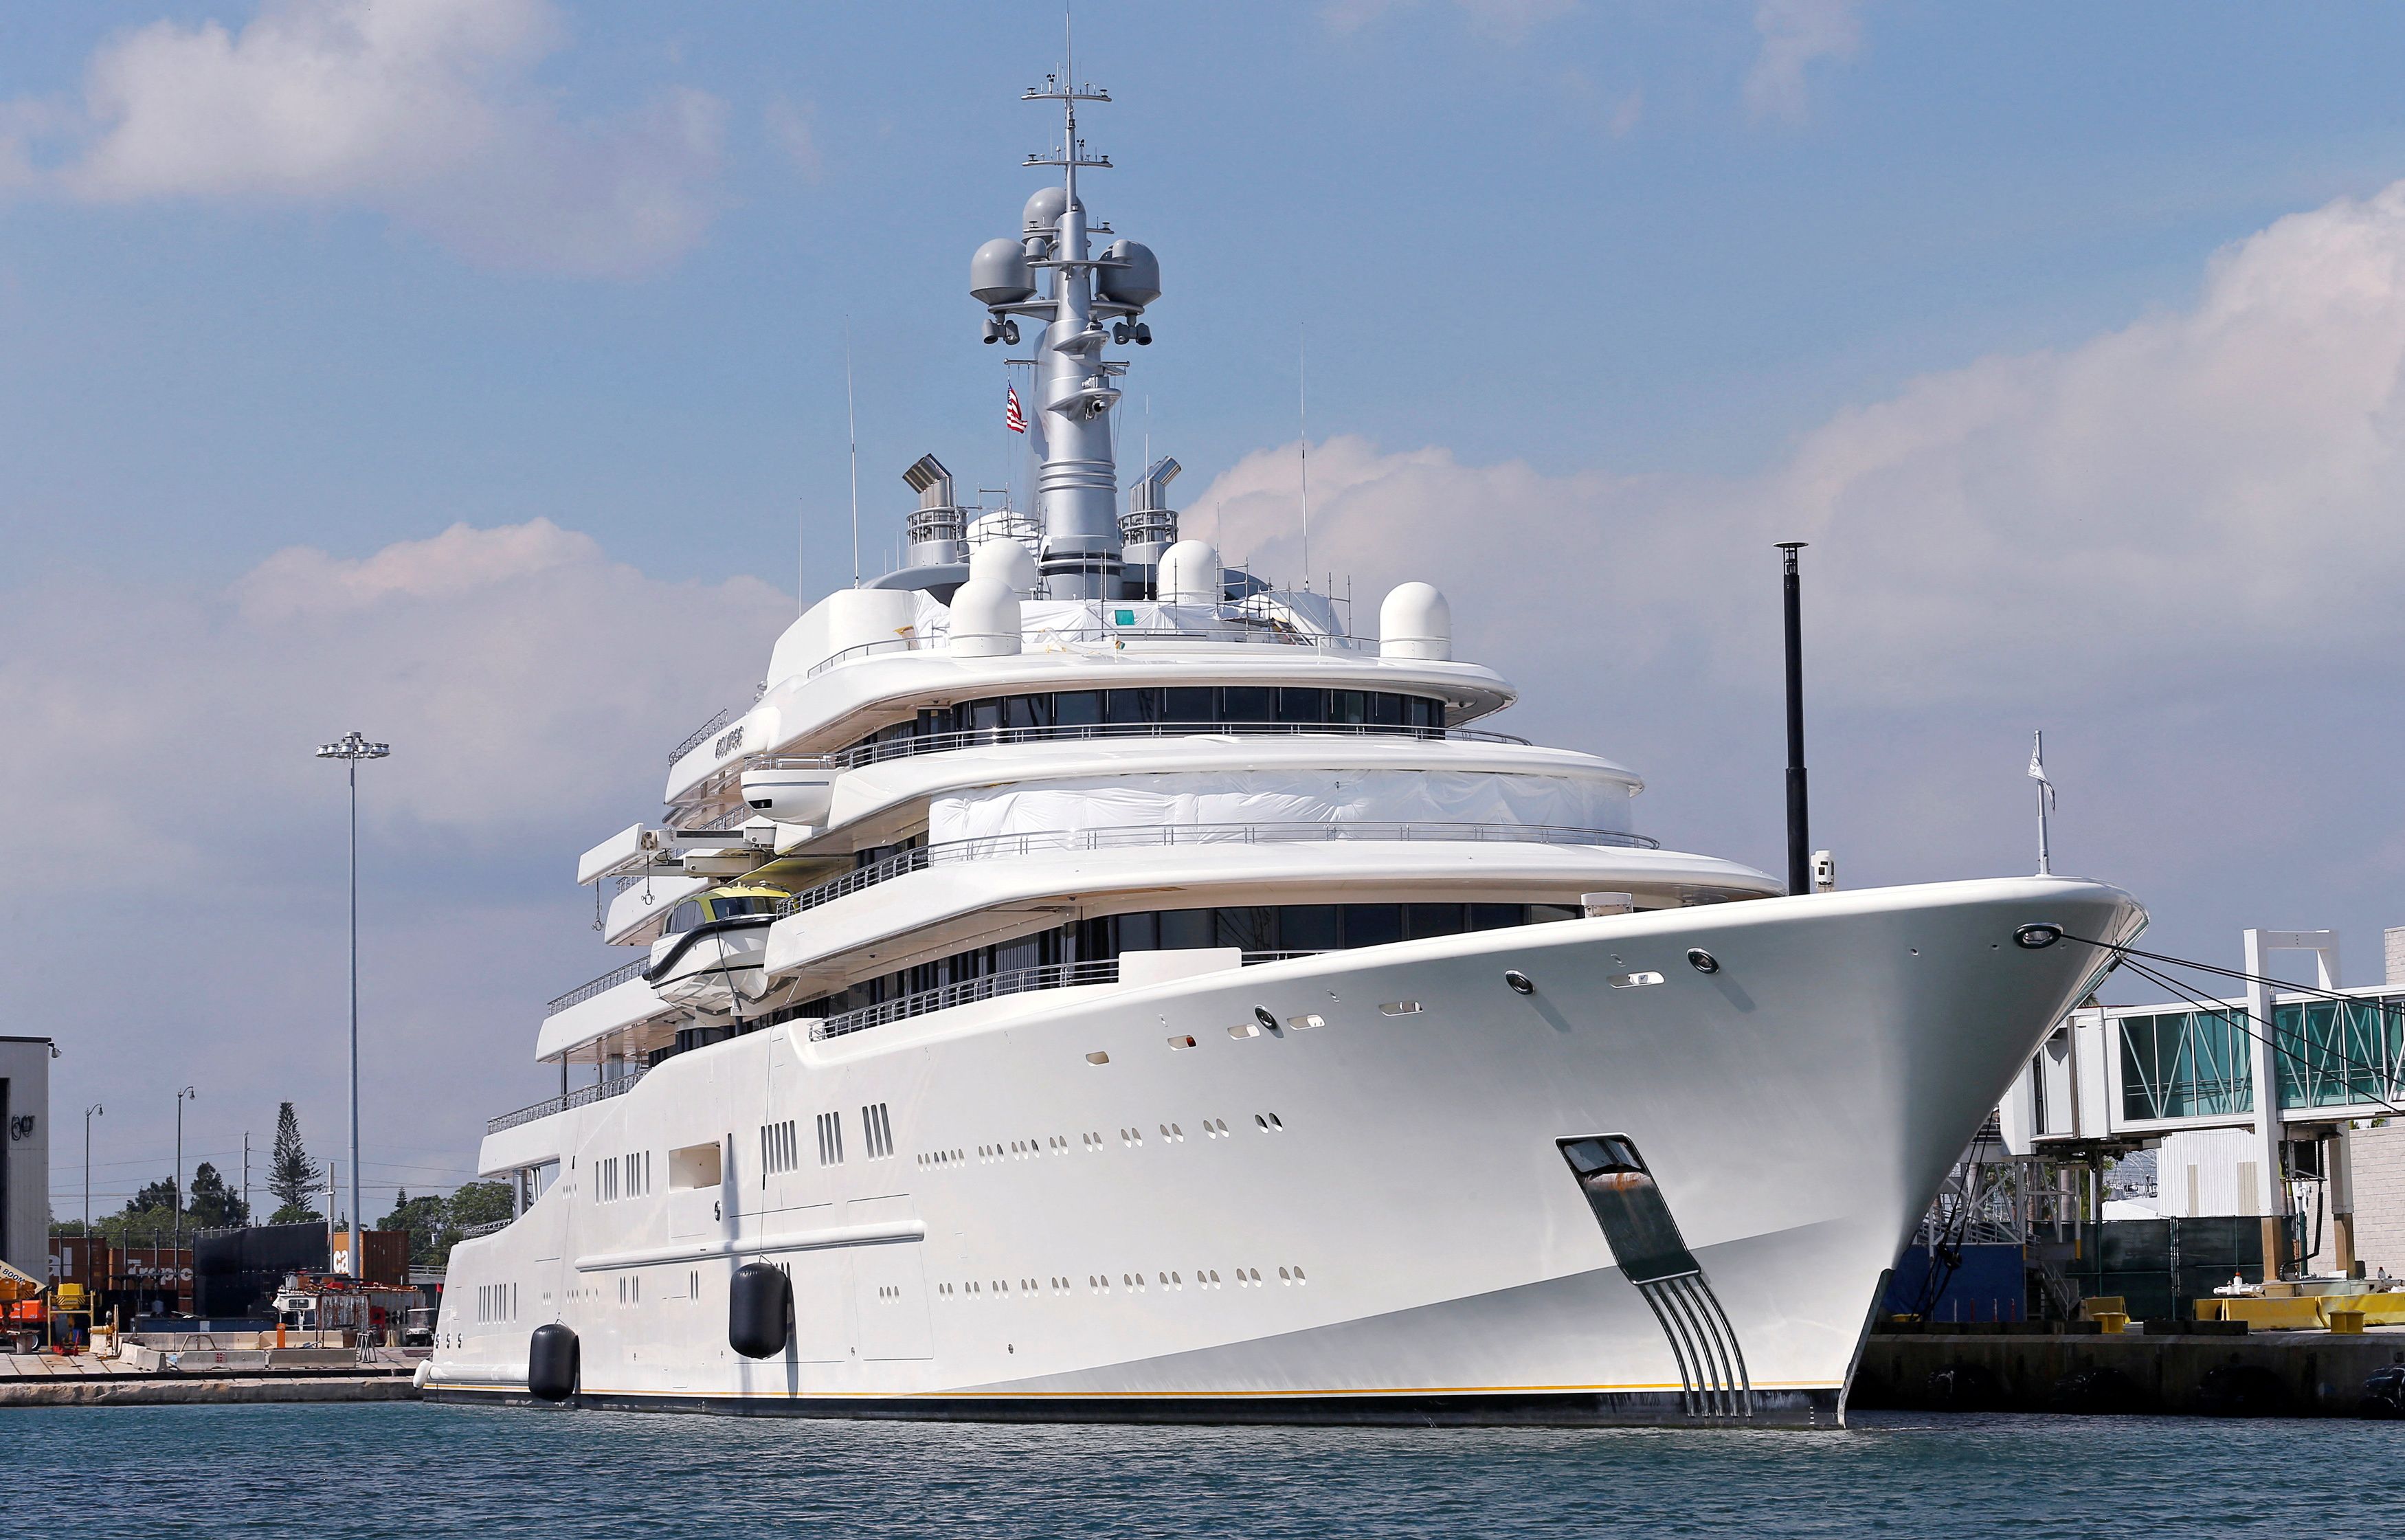 The Eclipse superyacht is seen at the Port of Palm Beach in Riviera Beach, Florida